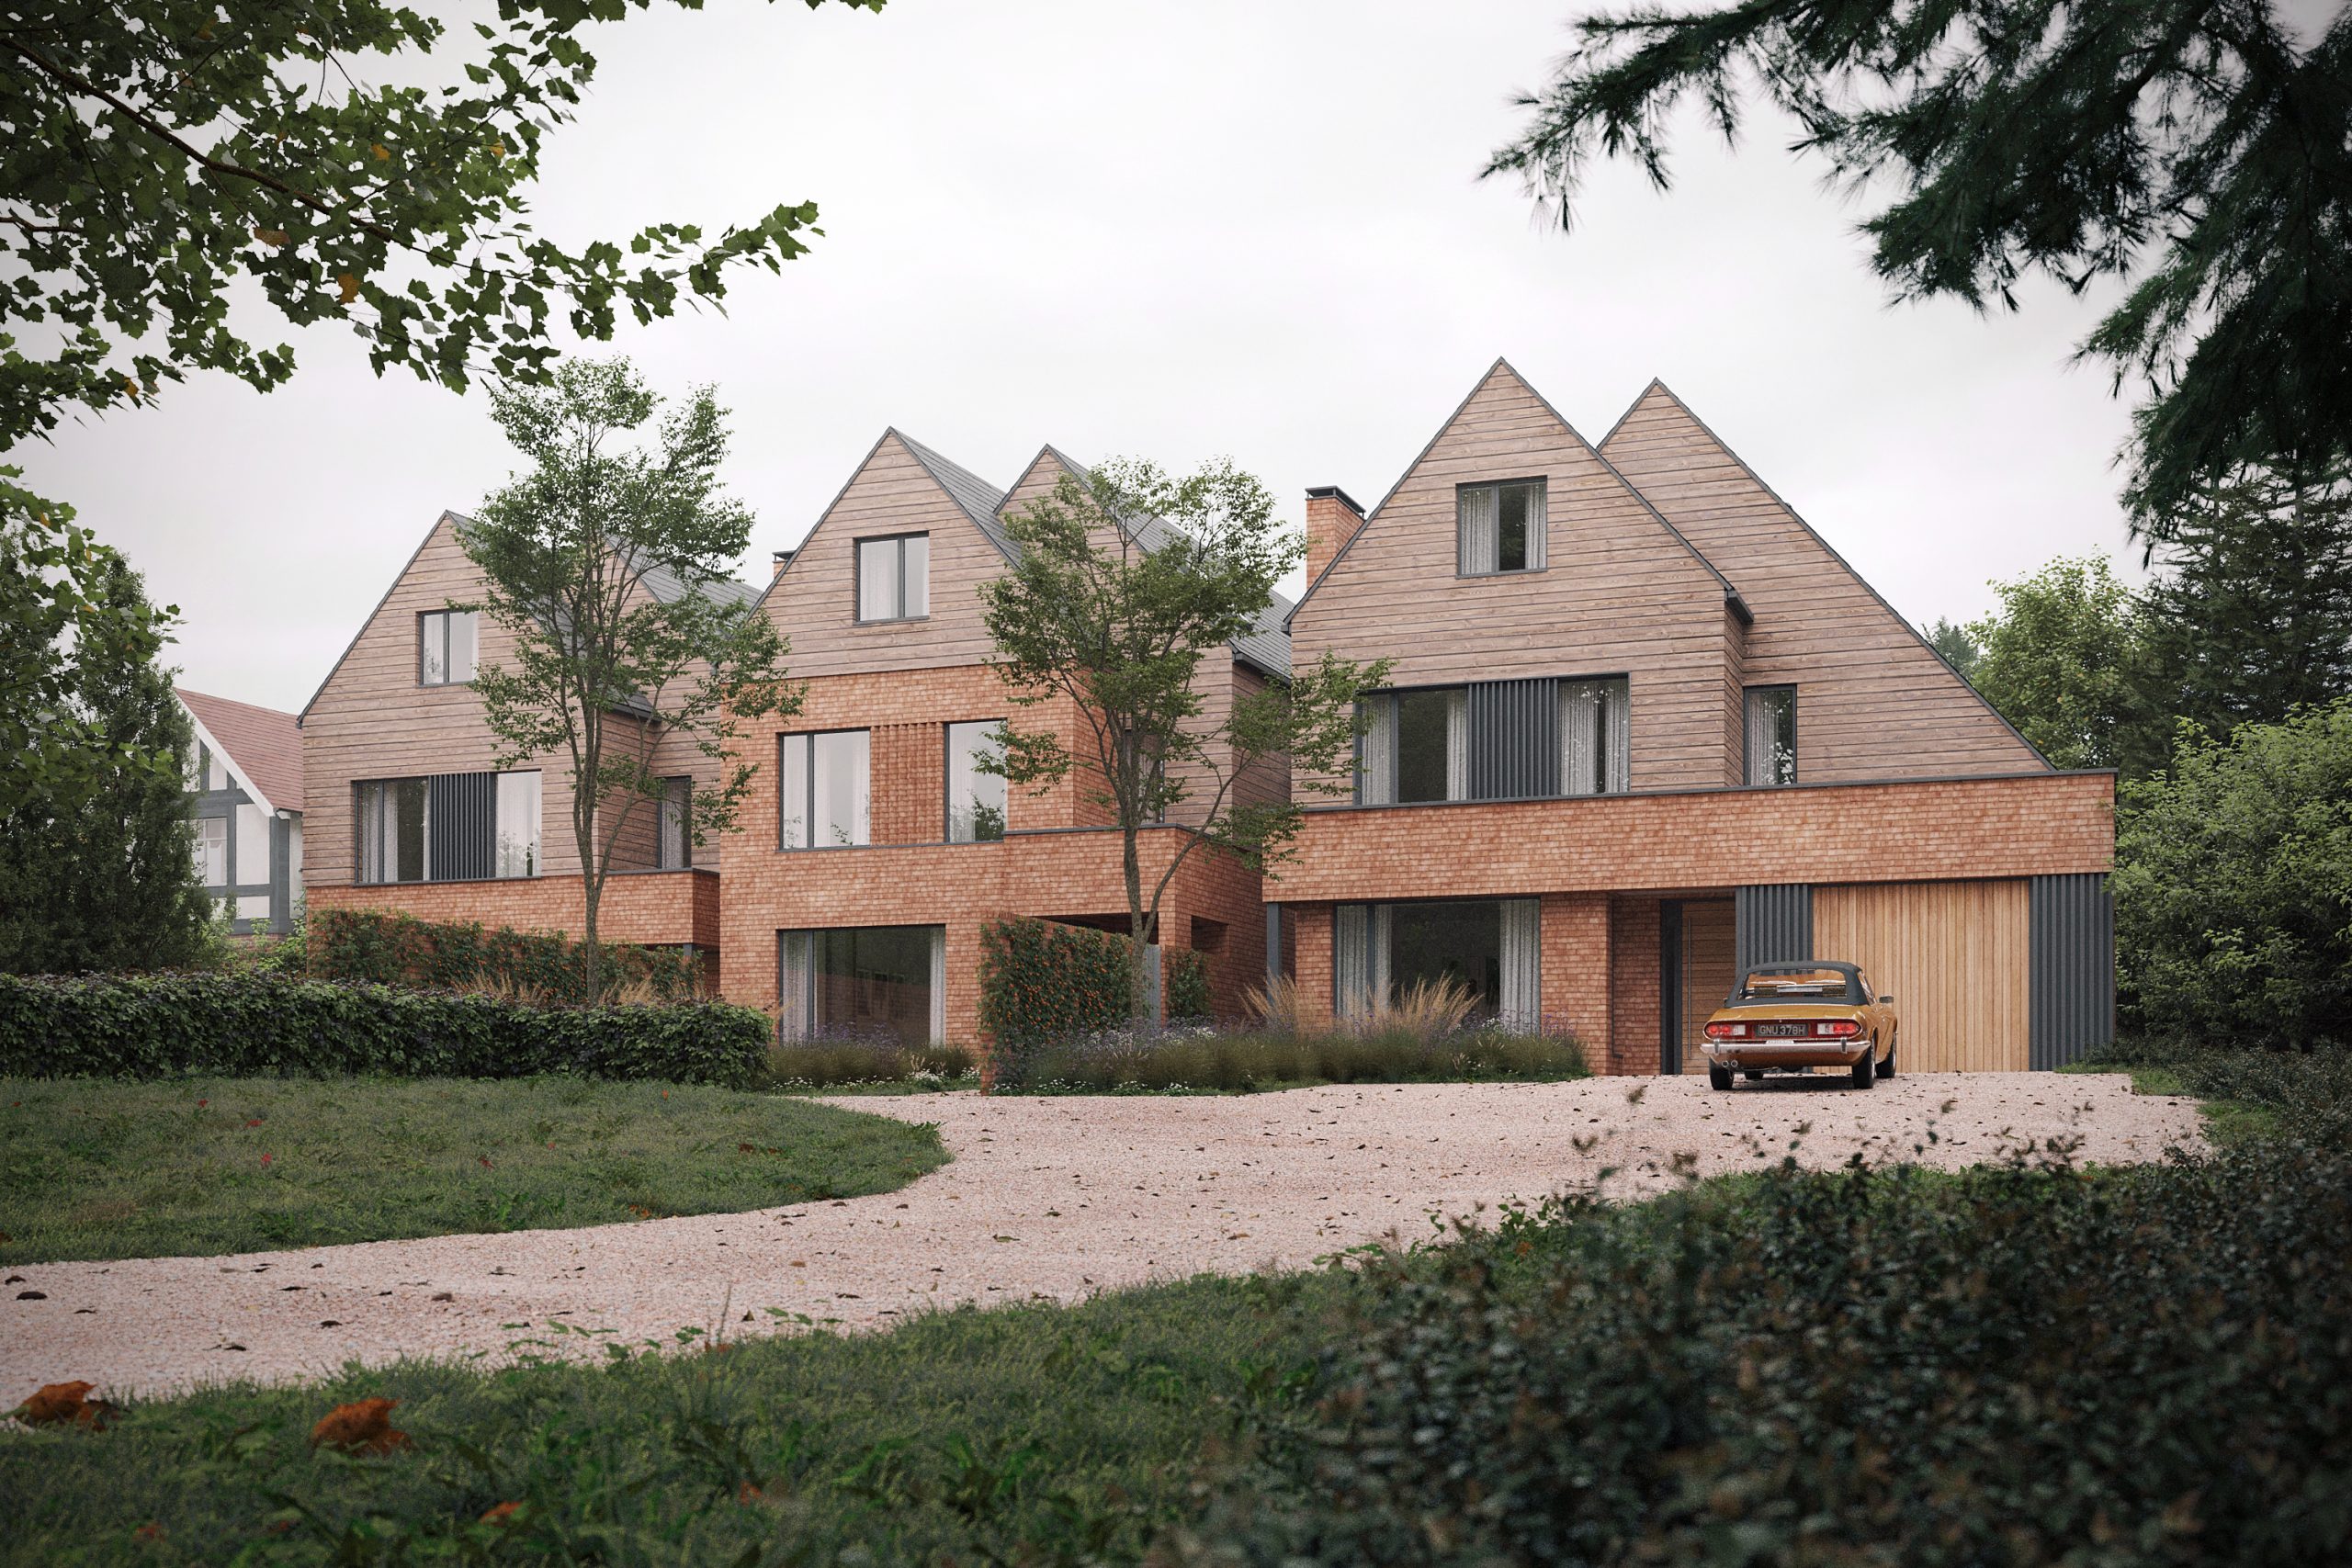 Three contemporary townhouses proposed for Liphook